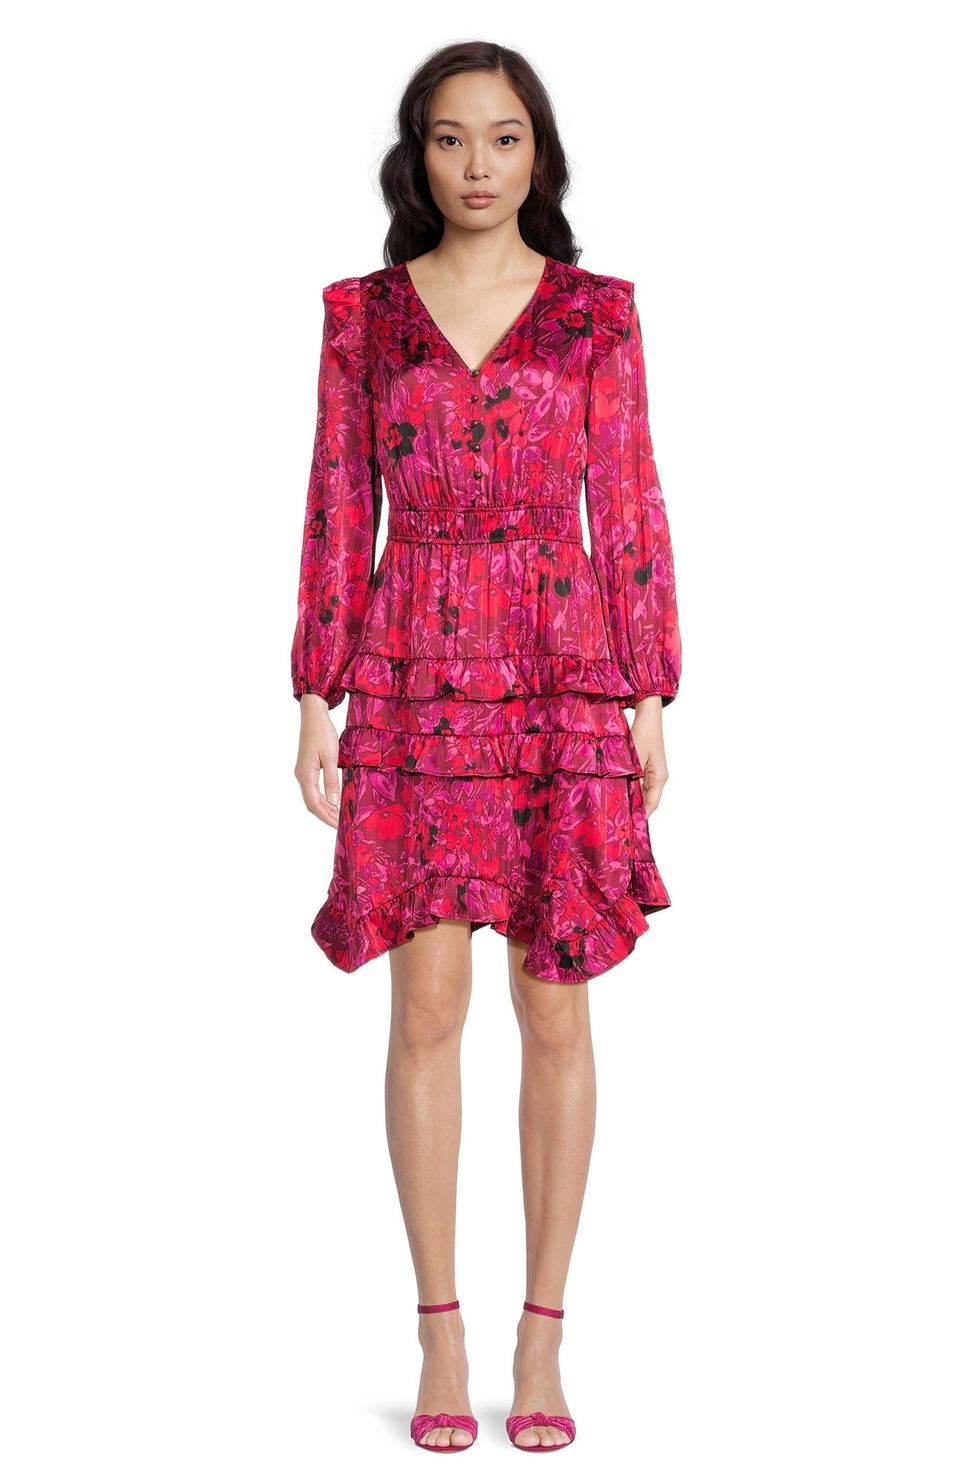 The Pioneer Woman Tiered Ruffle Dress with Long Sleeves